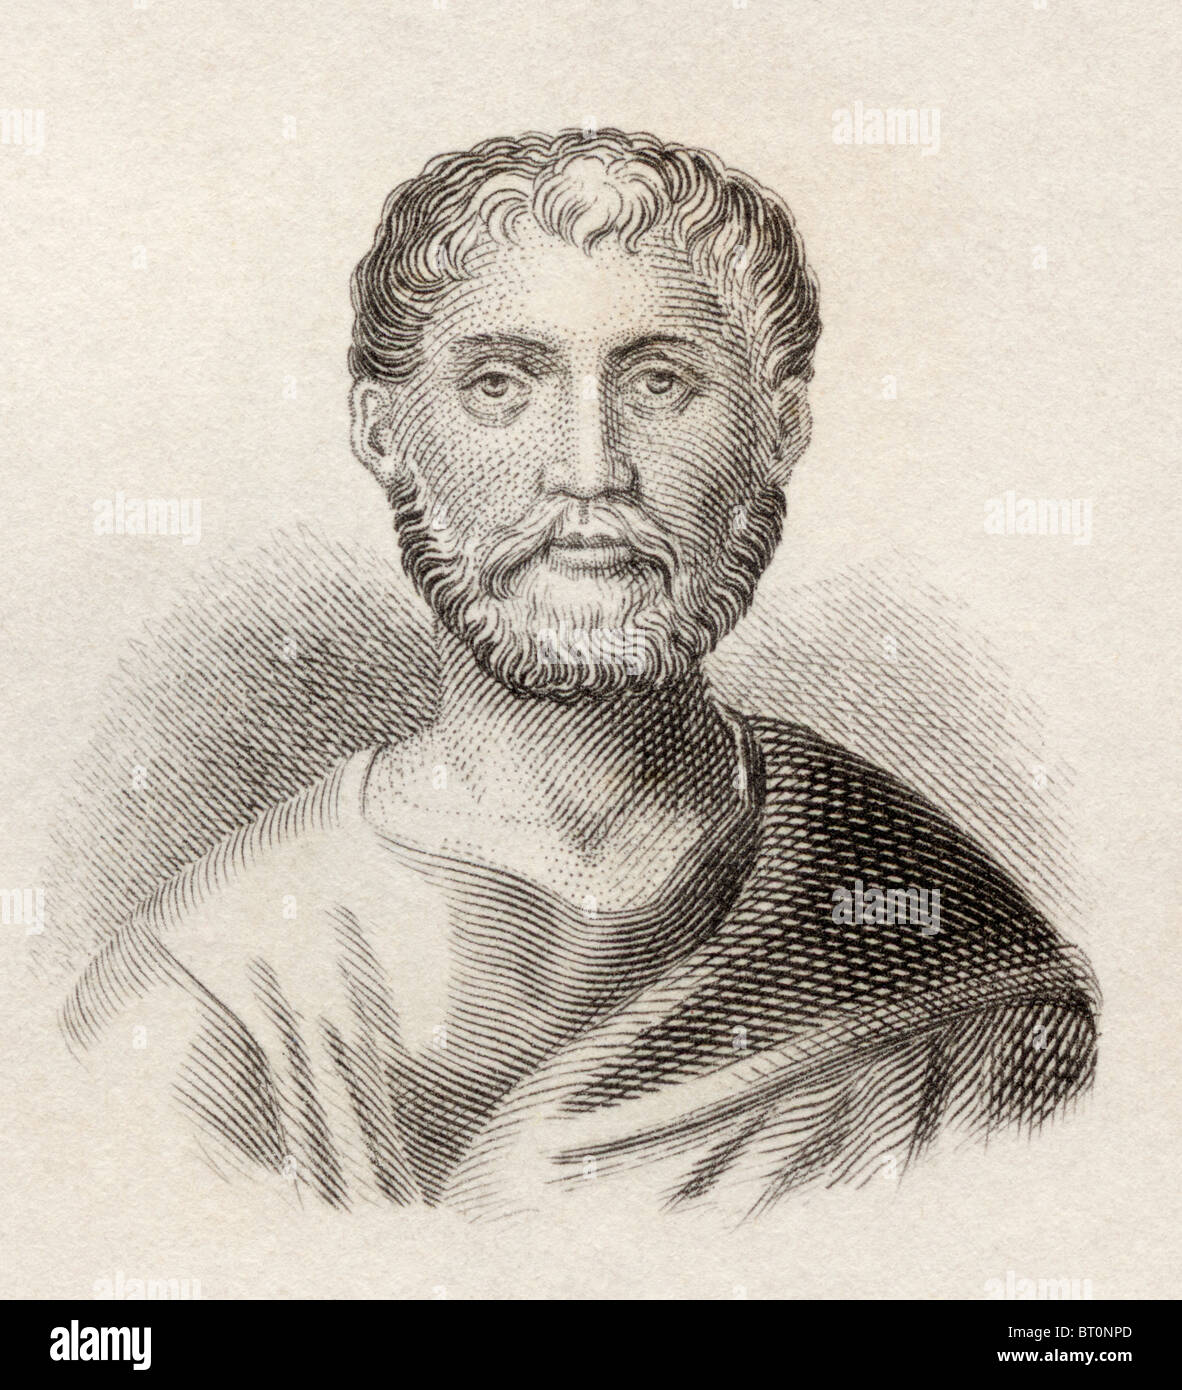 Publius Terentius Afer c.195/185 to 159 BC. Ancient Roman Playwright. Known in English as Terence. Stock Photo